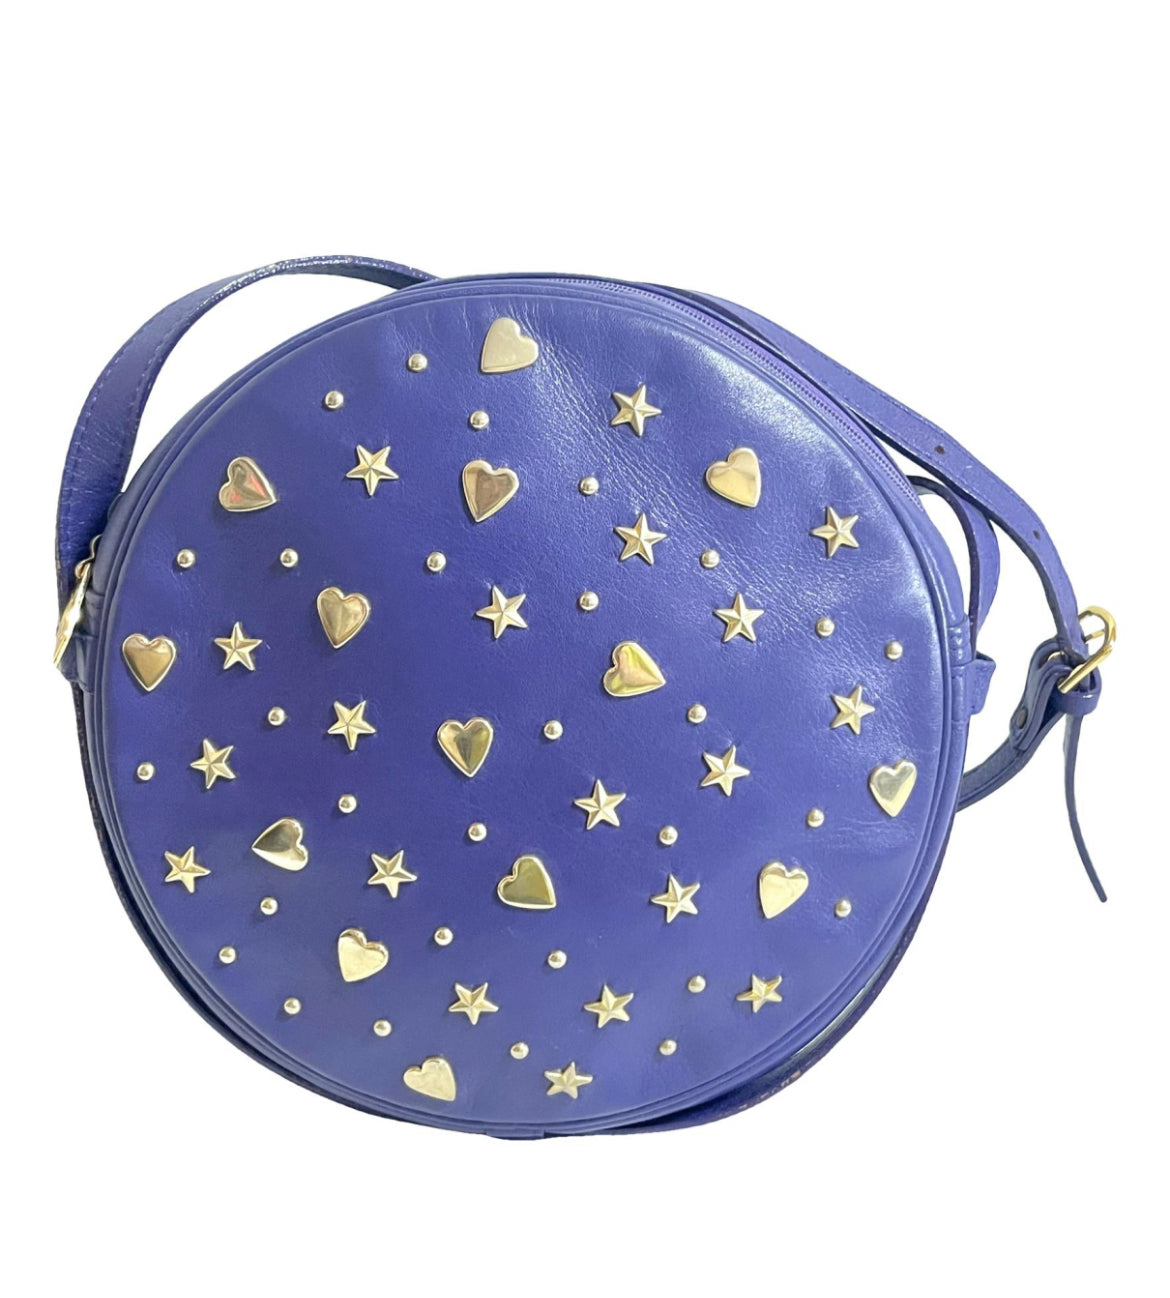 Vintage Yves Saint Laurent purple round bag with heart and star studs. One of a kind leather shoulder bag. 050730ac1